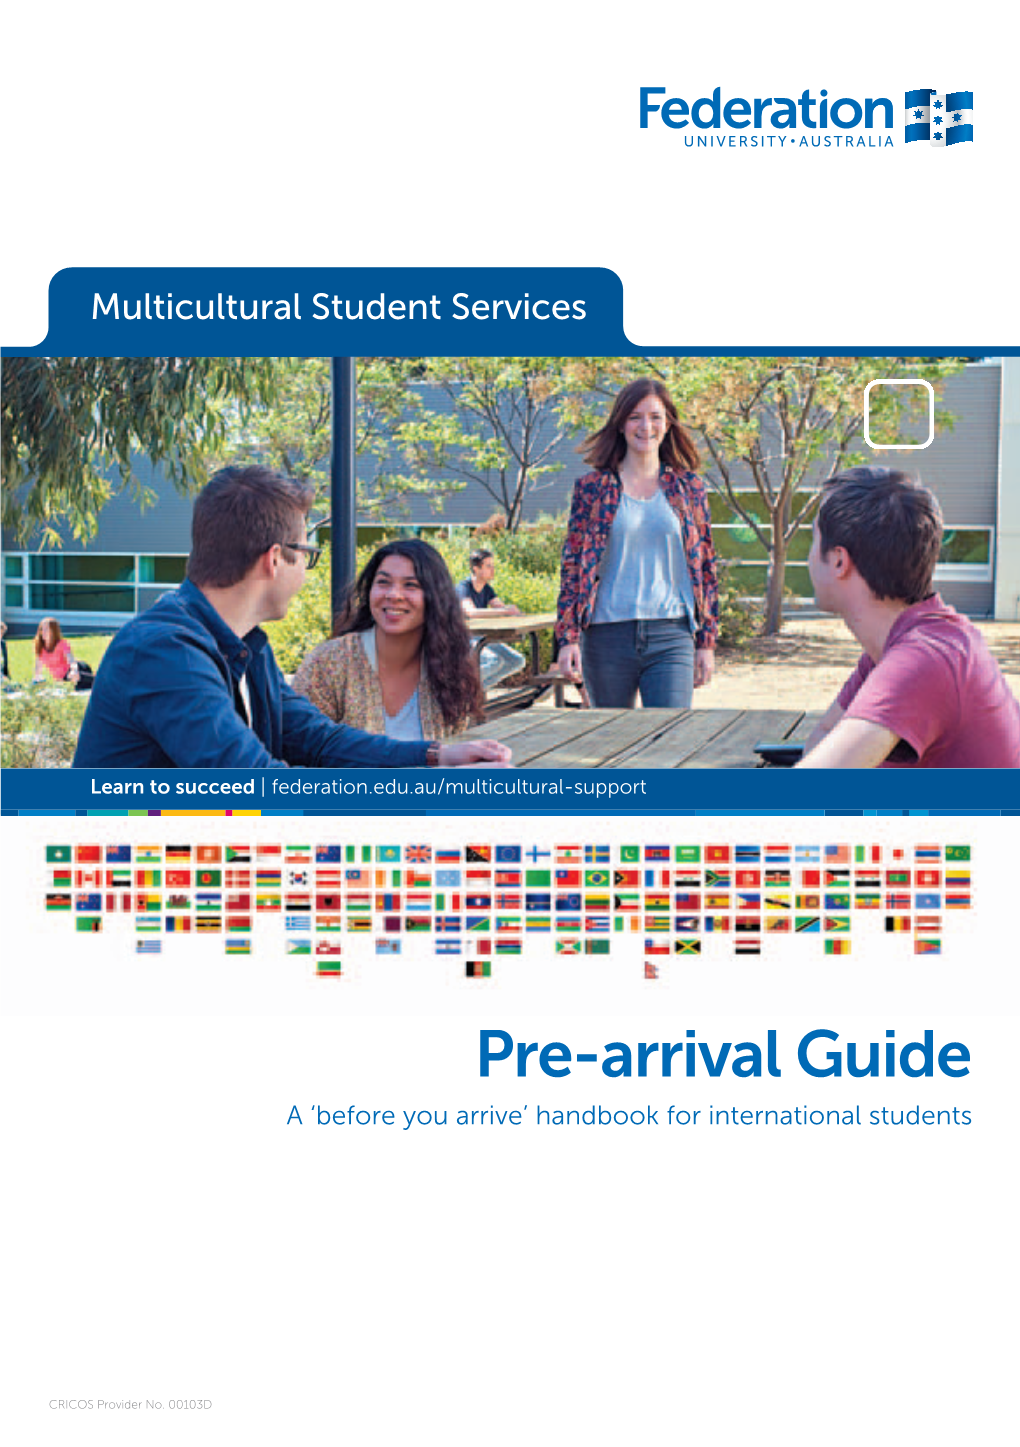 Pre-Arrival Guide a ‘Before You Arrive’ Handbook for International Students